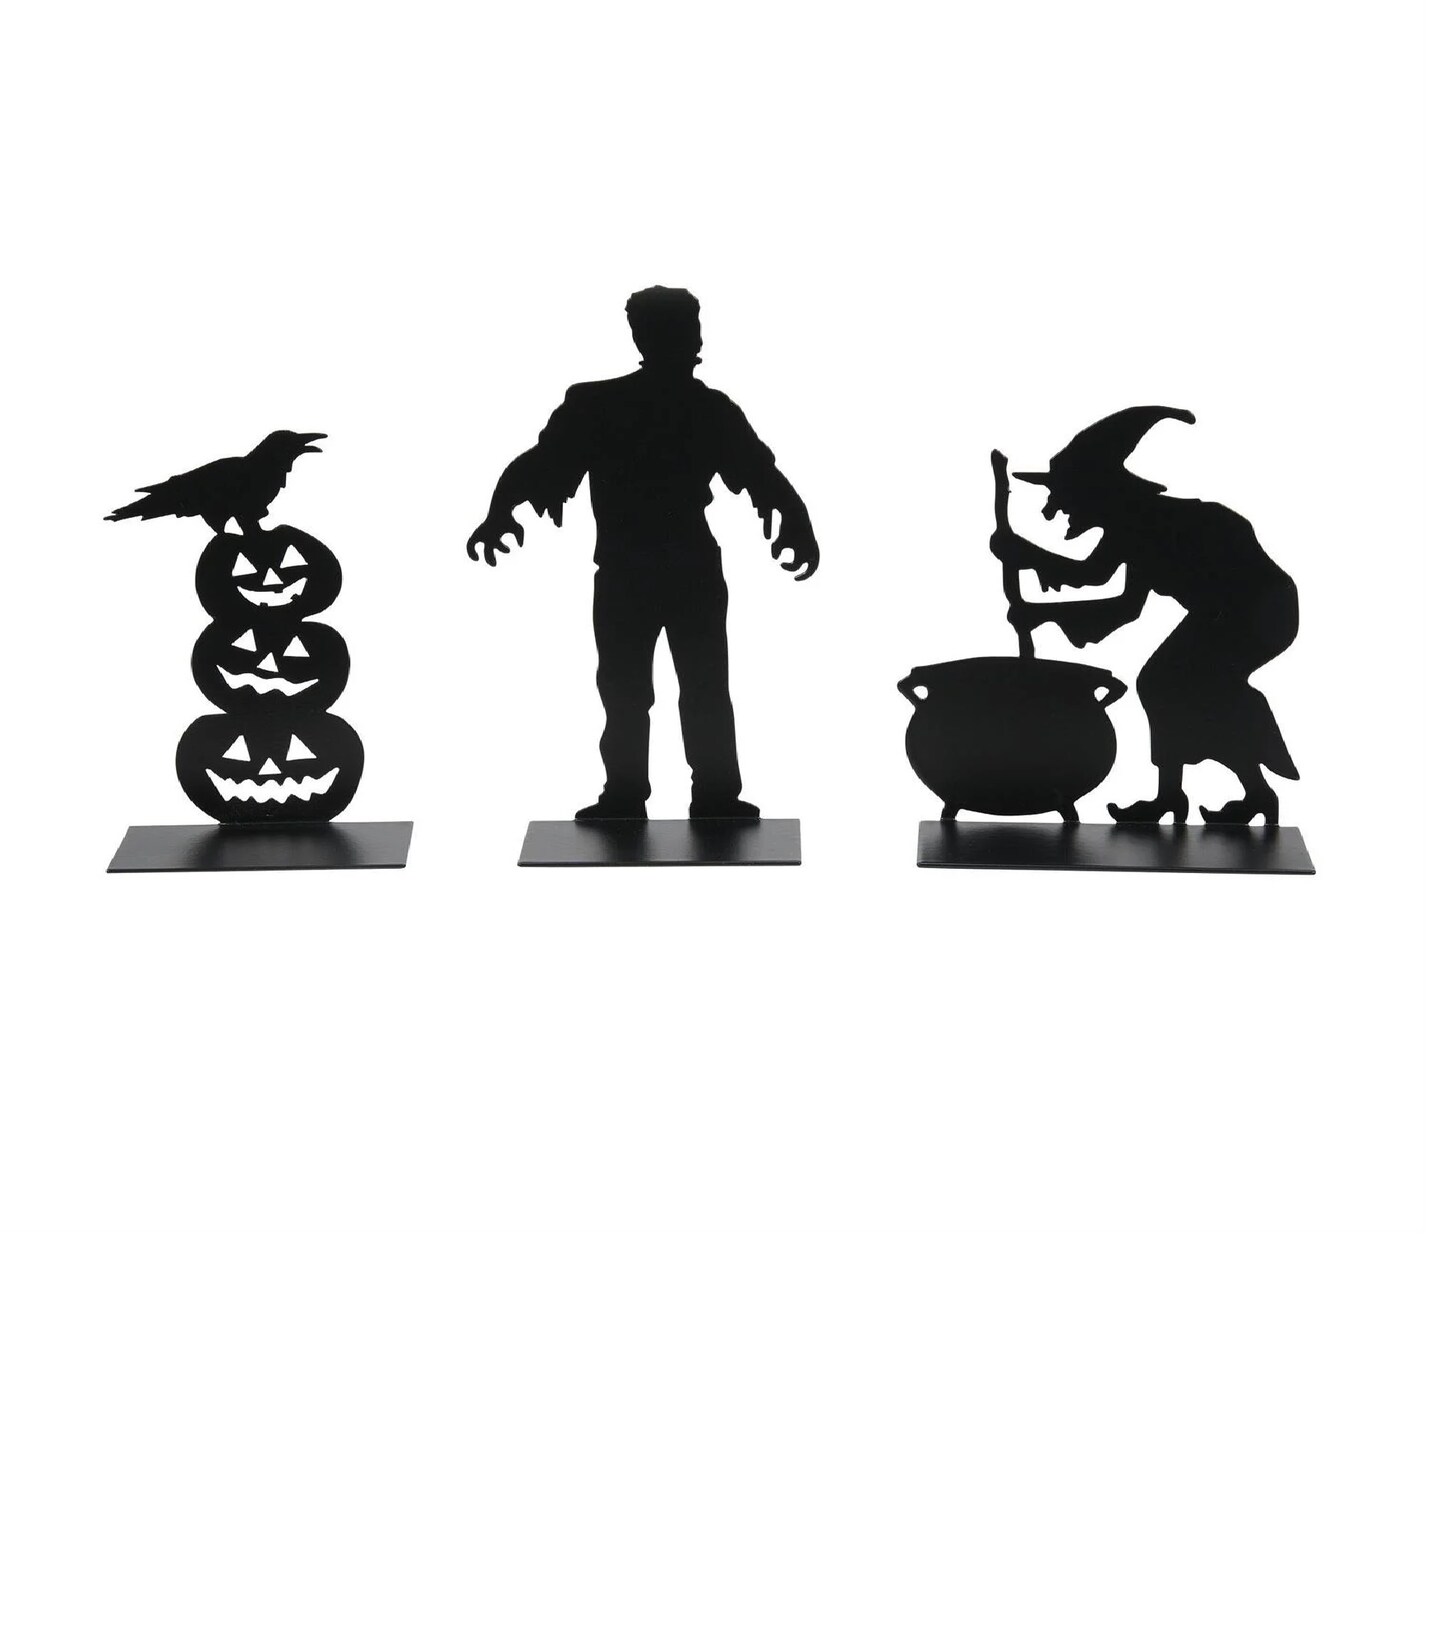 Department 56 Department 56 Village Halloween Accessories Spooky Silhouettes Set of 3 #6011479